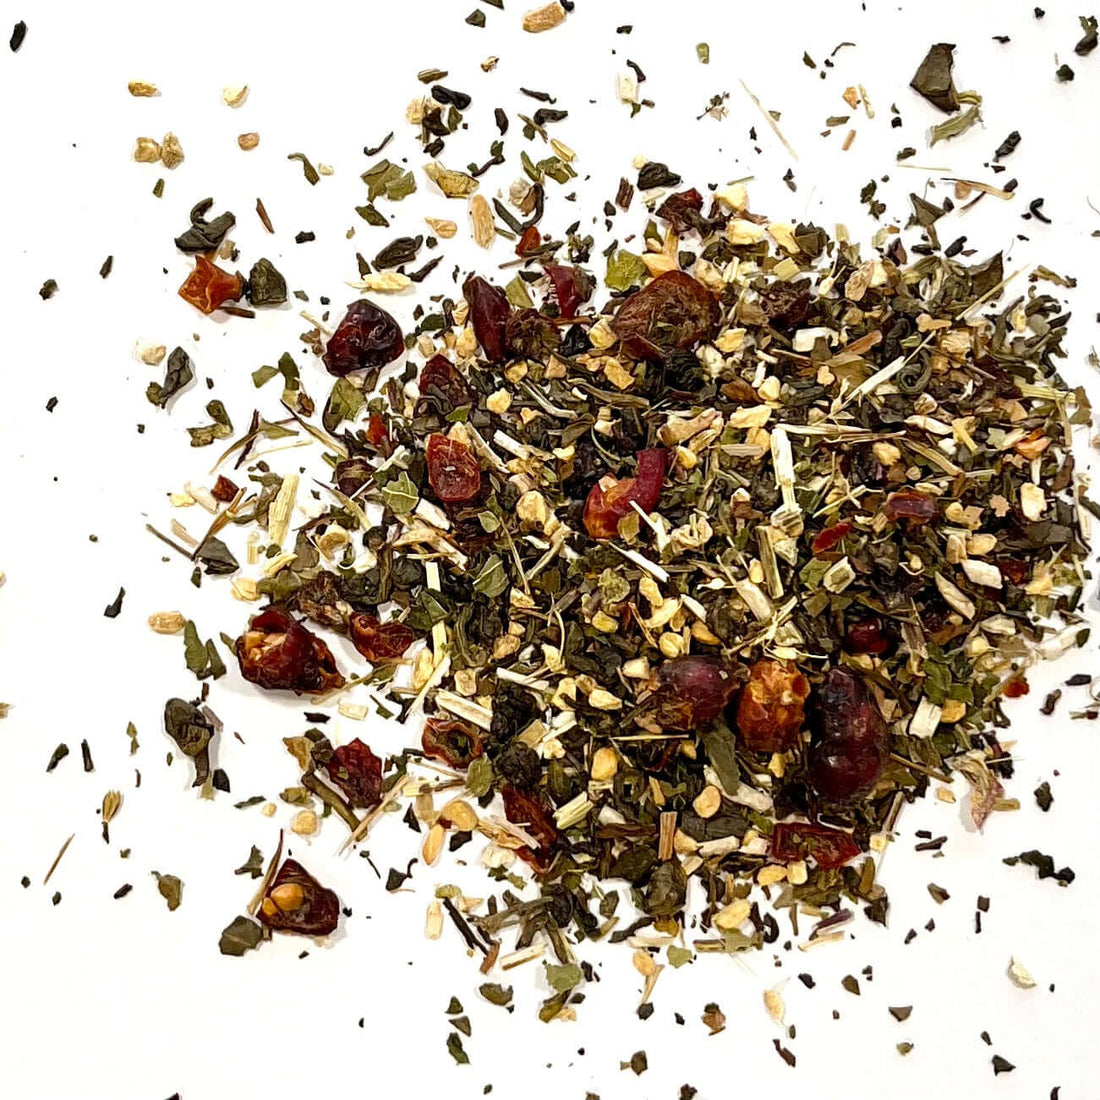 How exactly do teas support the immune system?